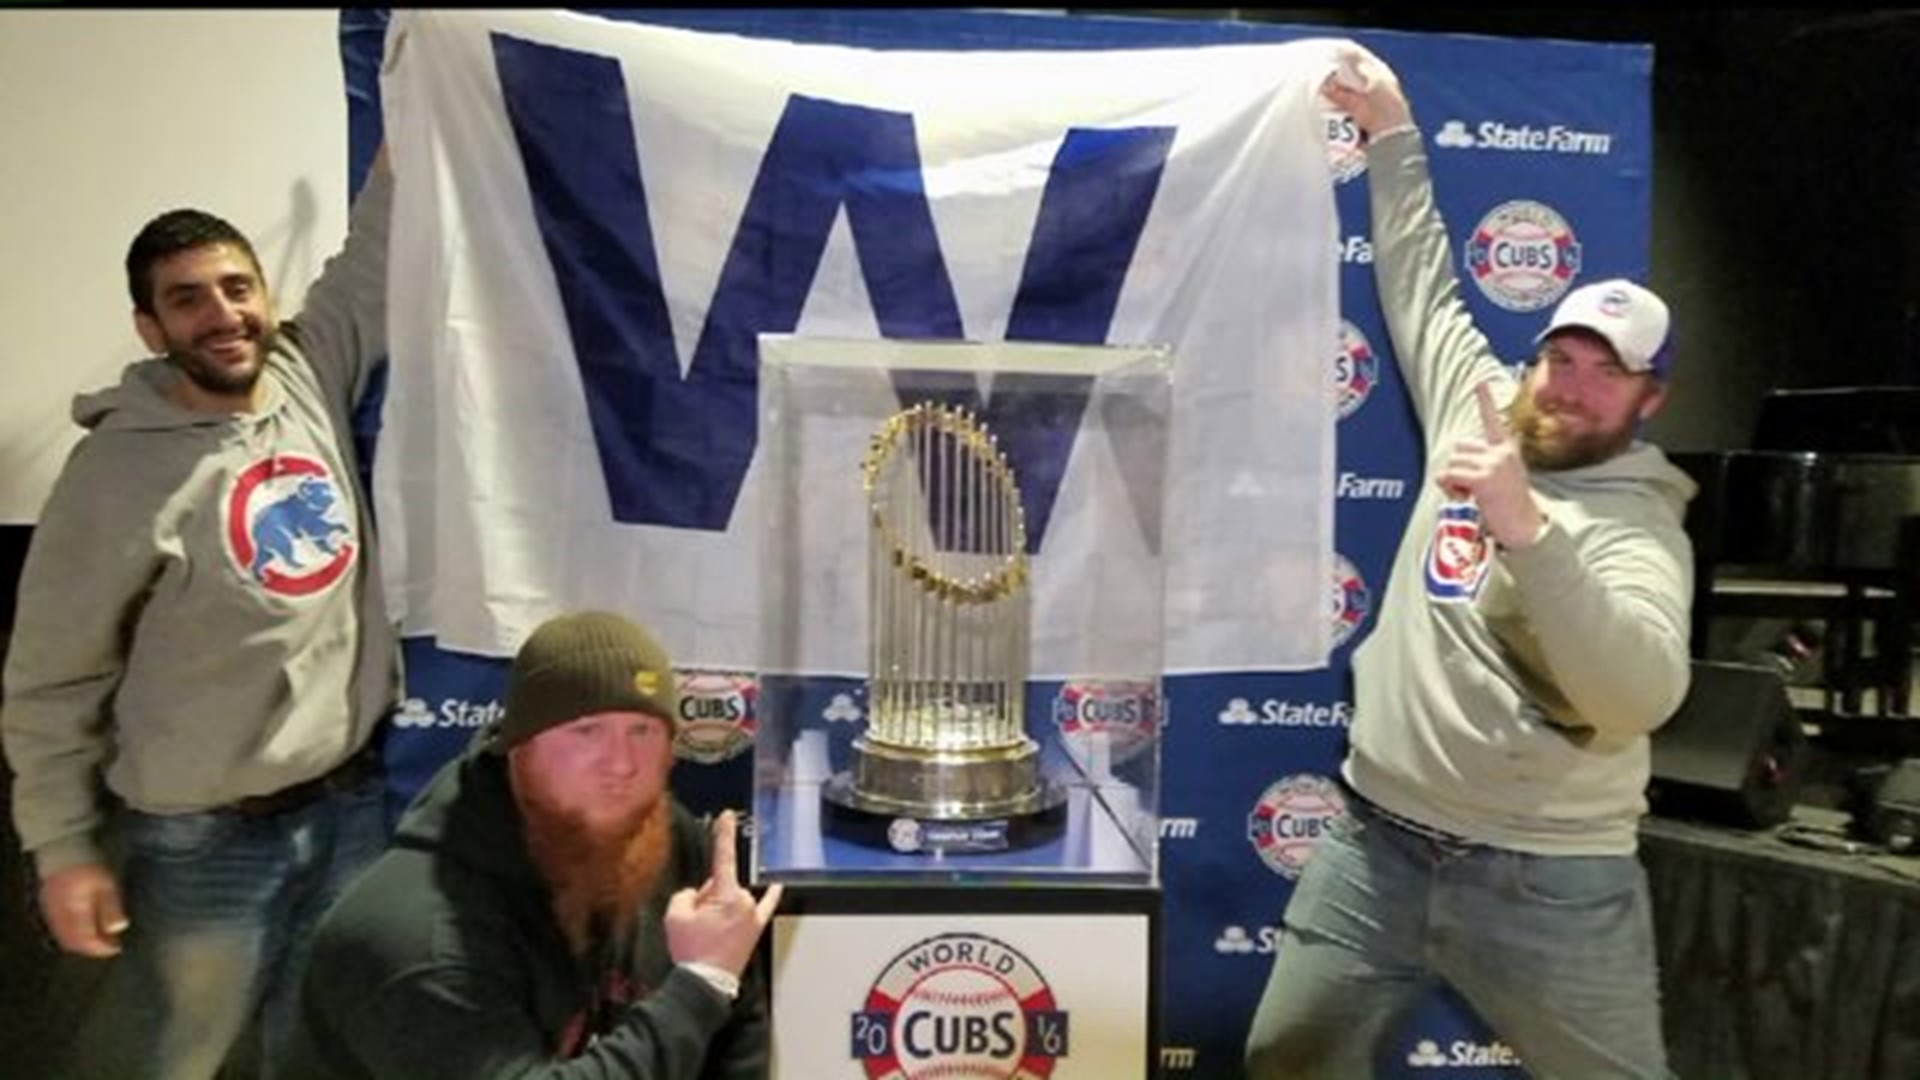 Overnight stay pays off for local Cubs fans